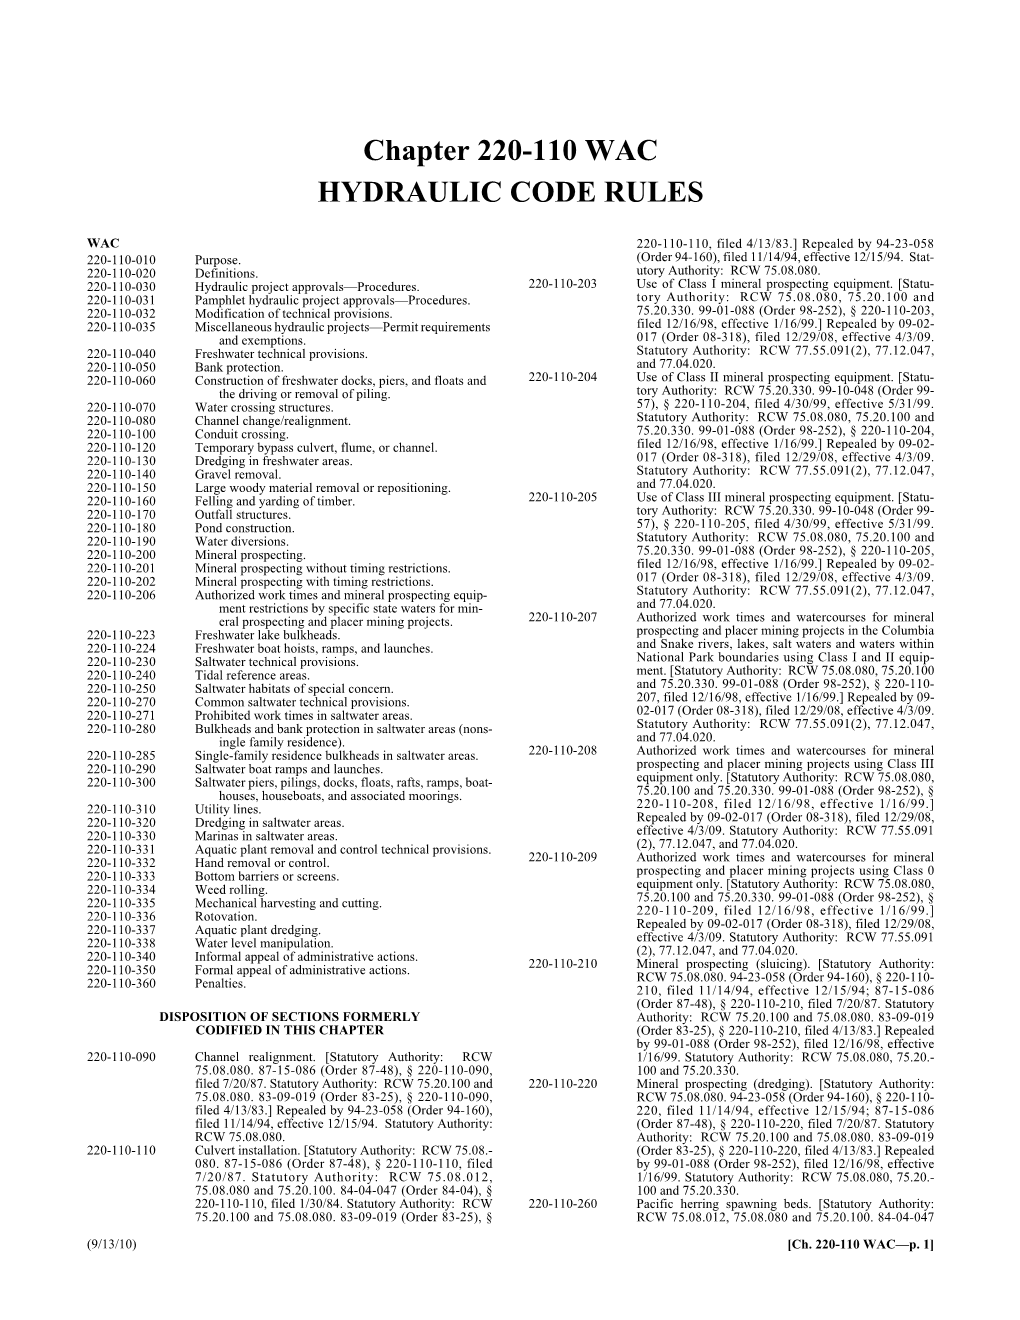 Chapter 220-110 WAC HYDRAULIC CODE RULES